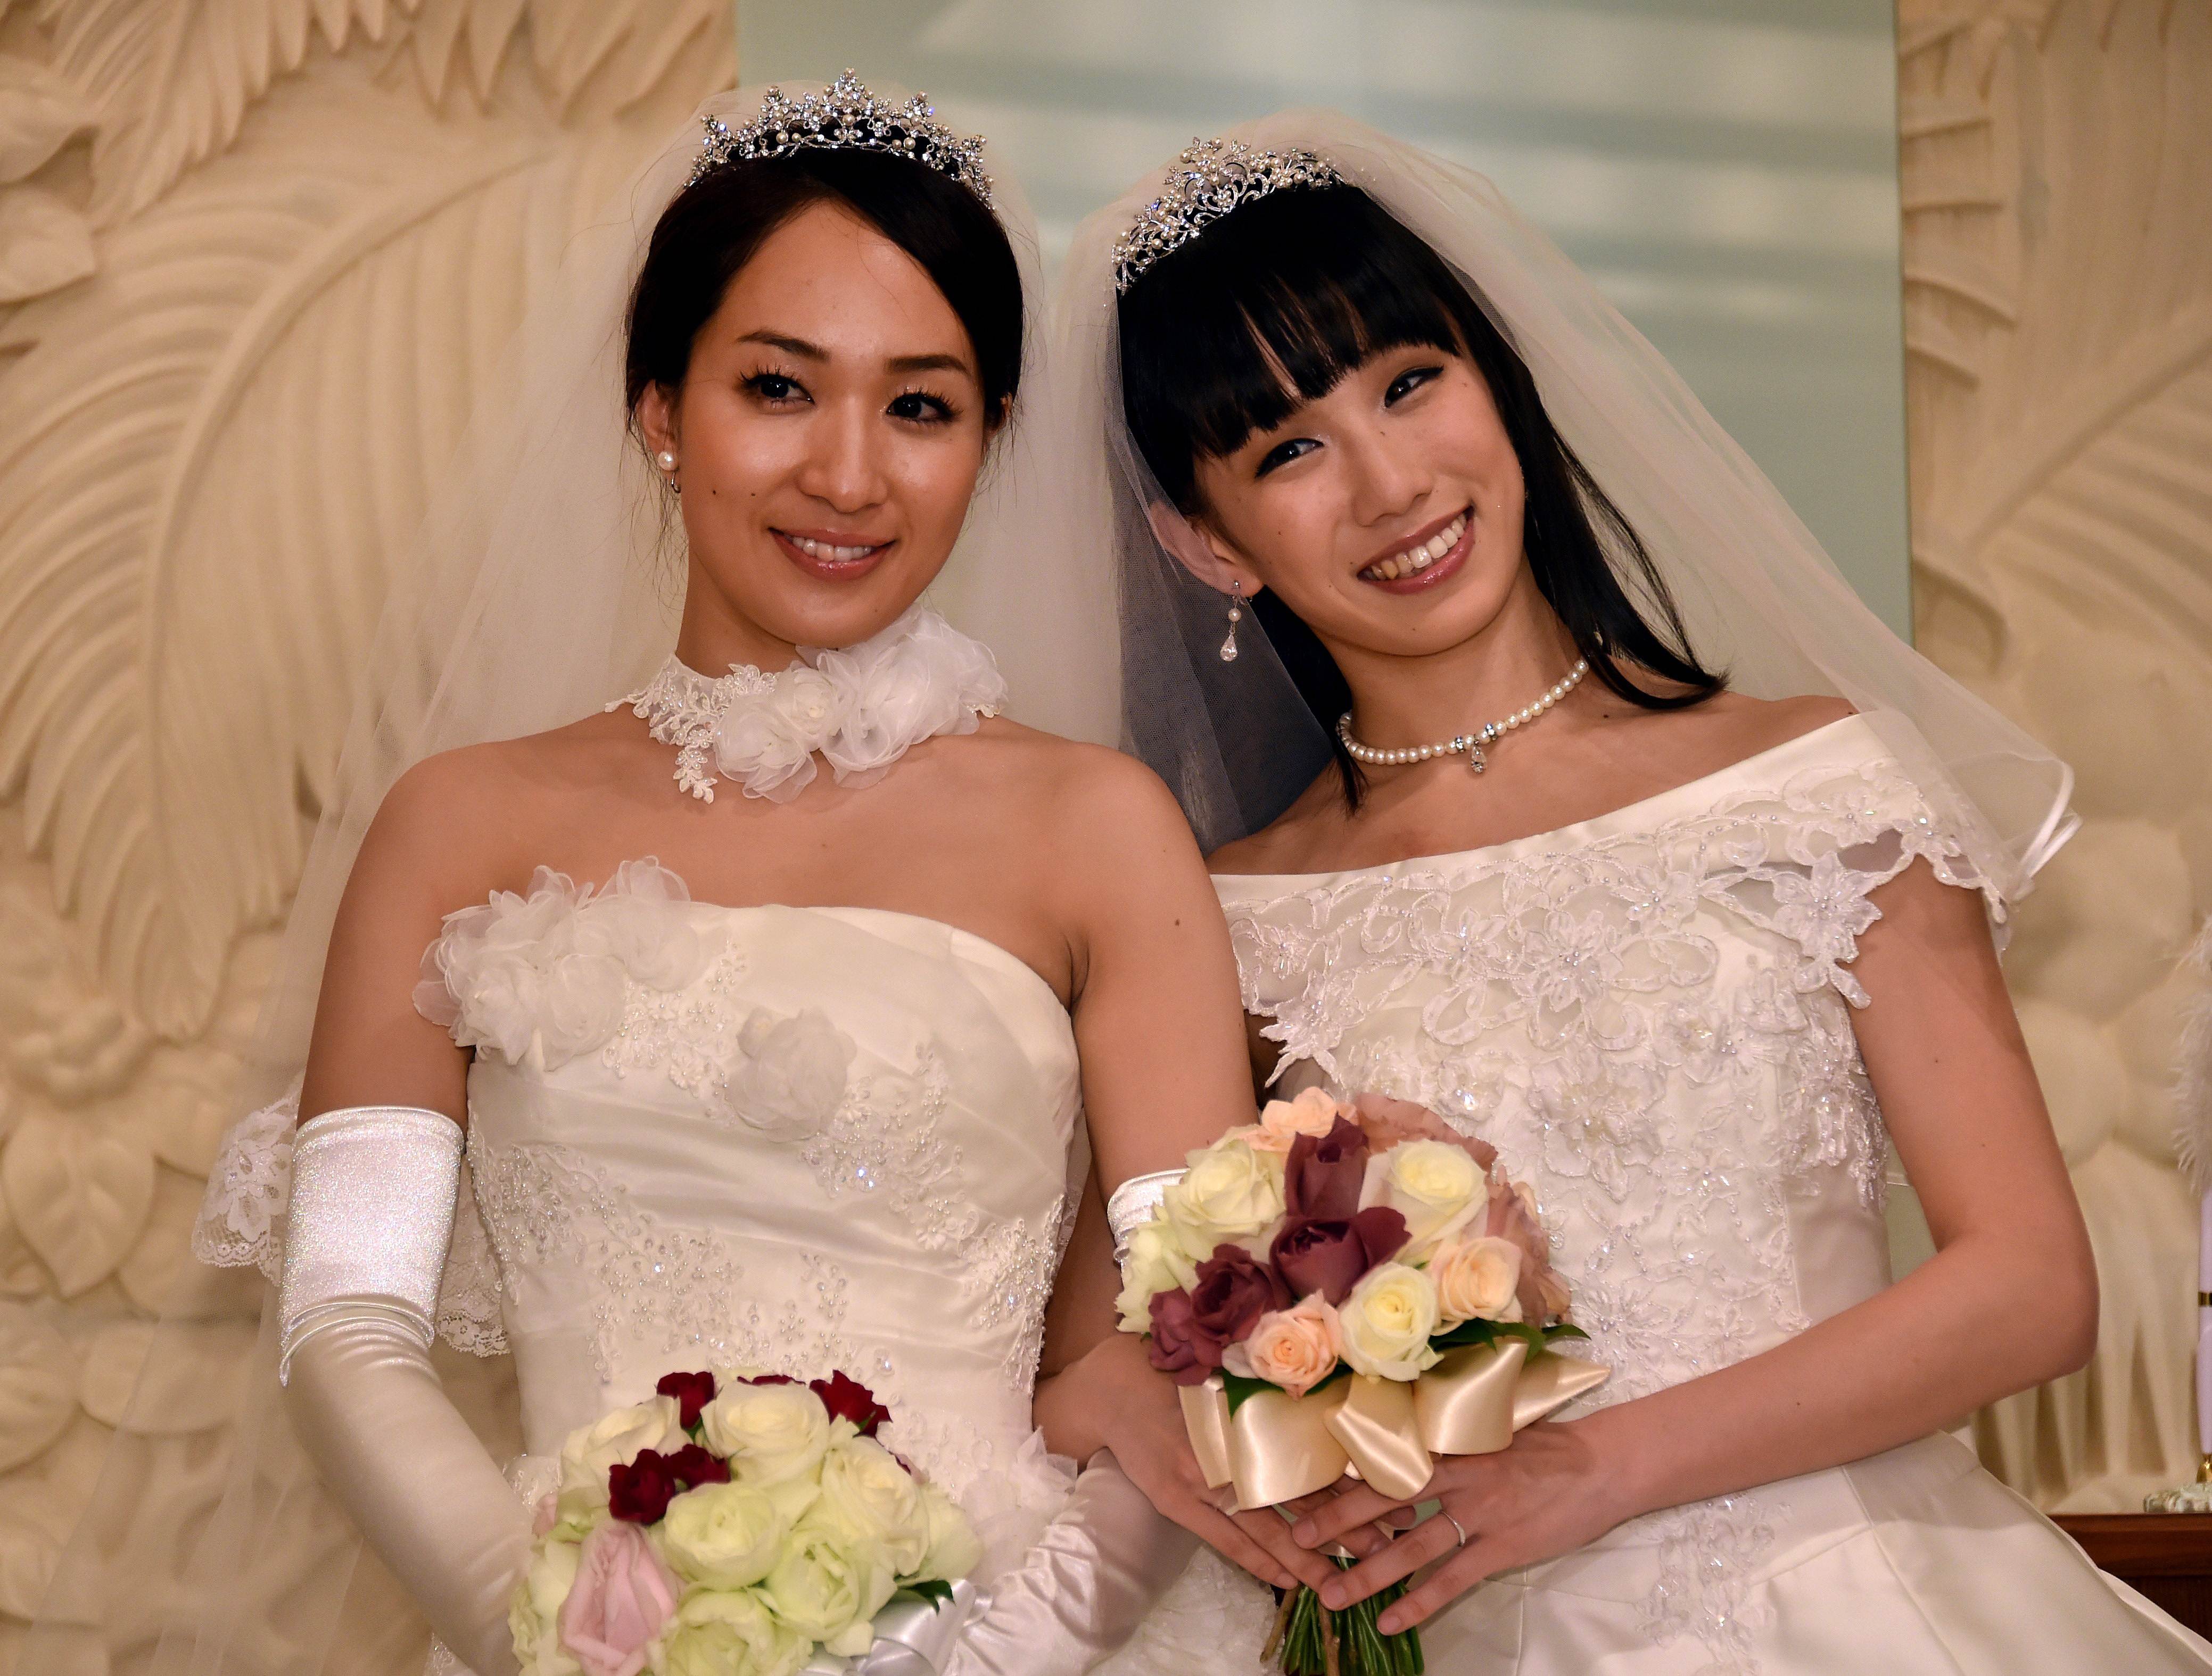 Lesbian Couple Wed Amid Calls To Legalize Samesex Marriage The